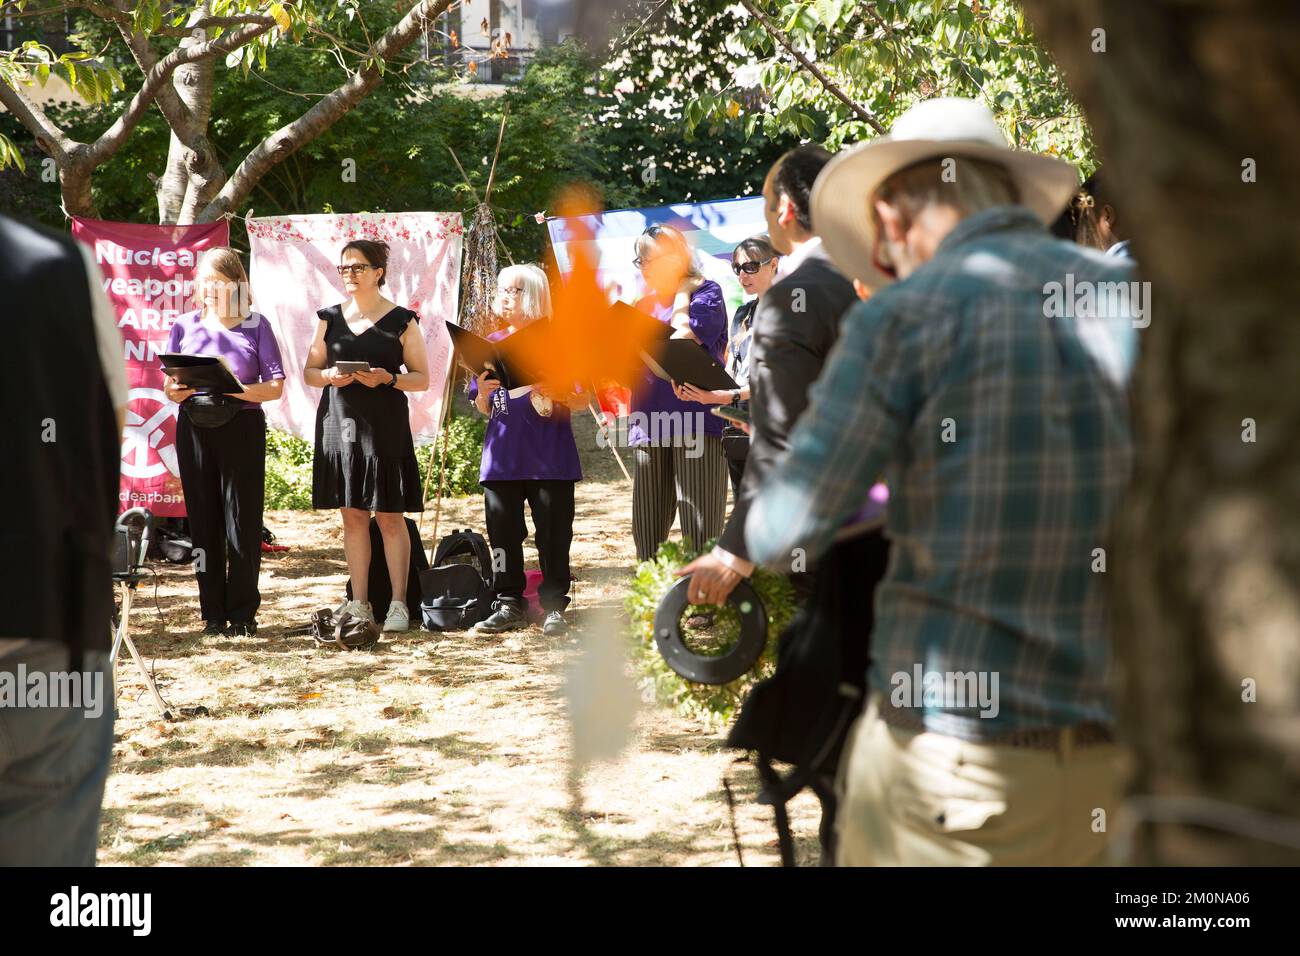 People gather near the cherry tree planted in memory of the victims of Hiroshima during a commemoration event in Tavistock Square, central London. Stock Photo